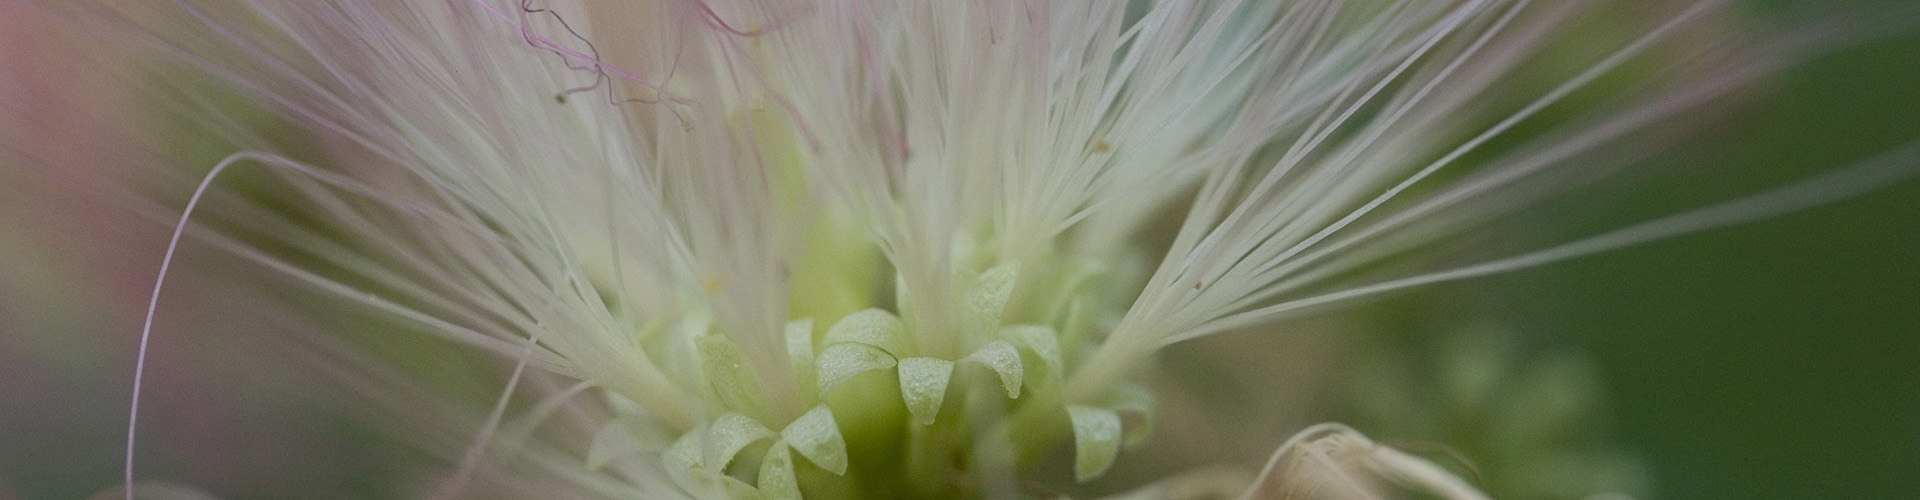 Close-up view of threadlike flowers